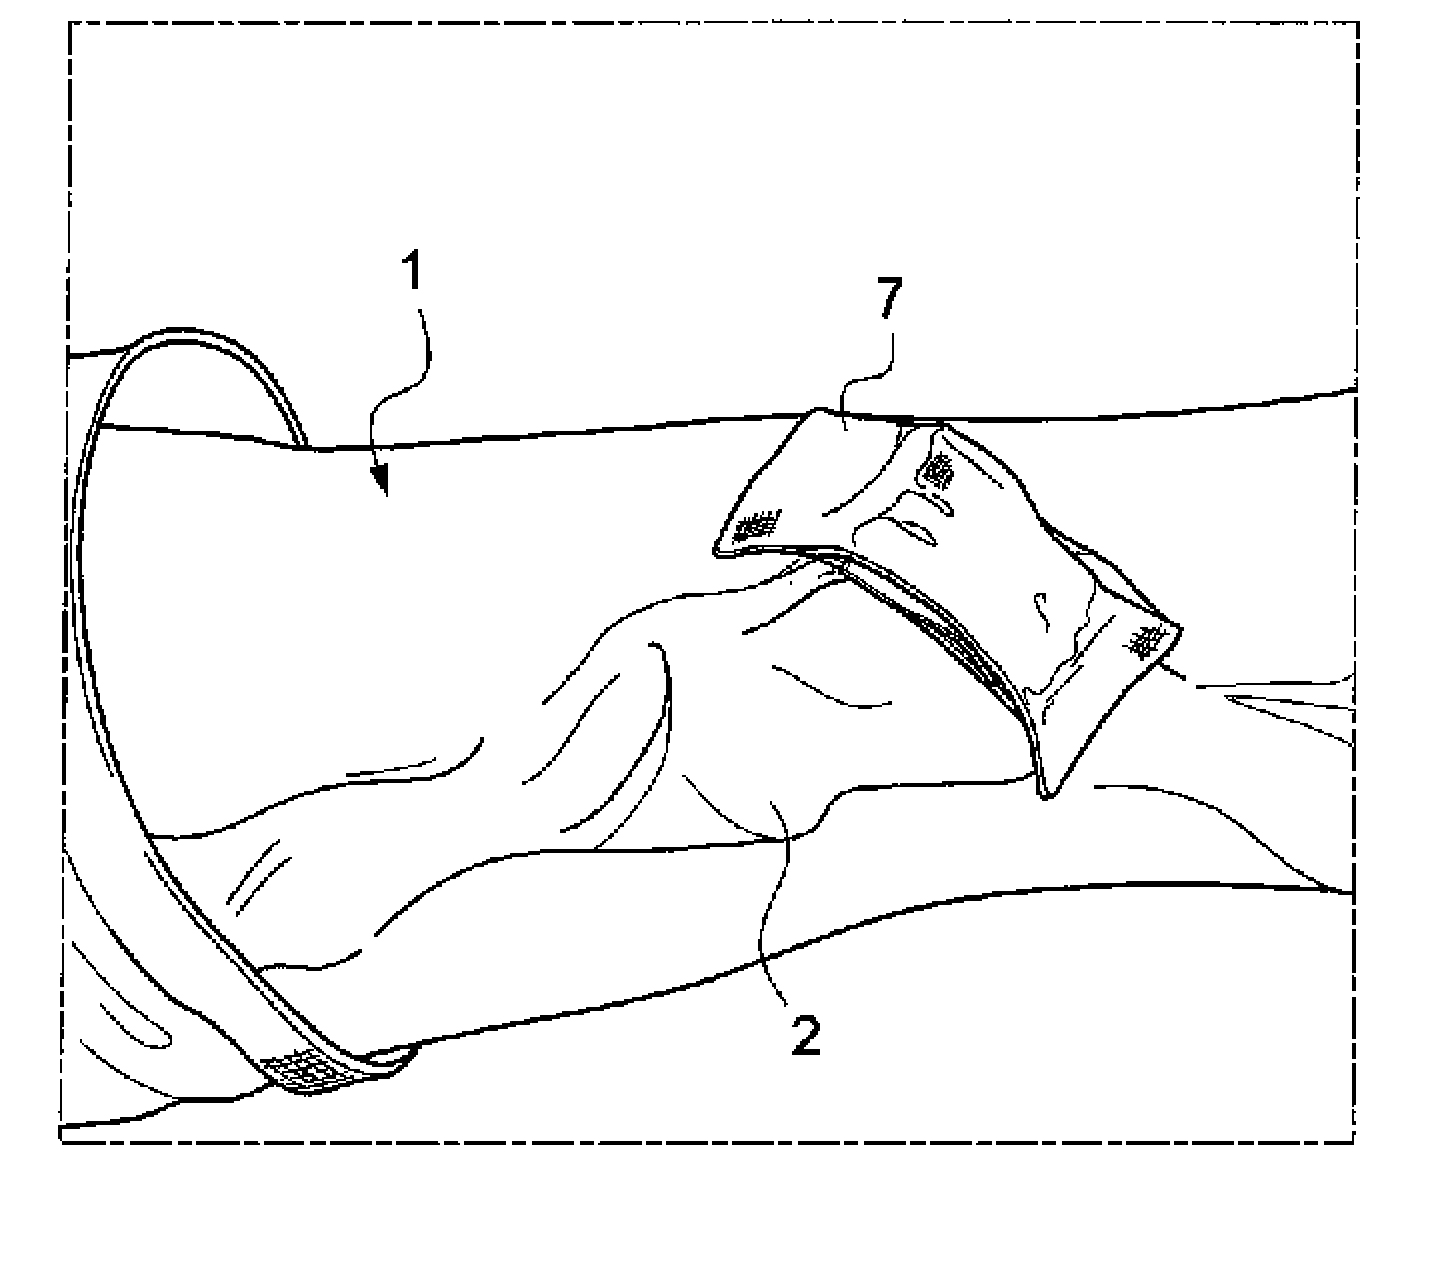 Medical device for a puncture site or infusion site